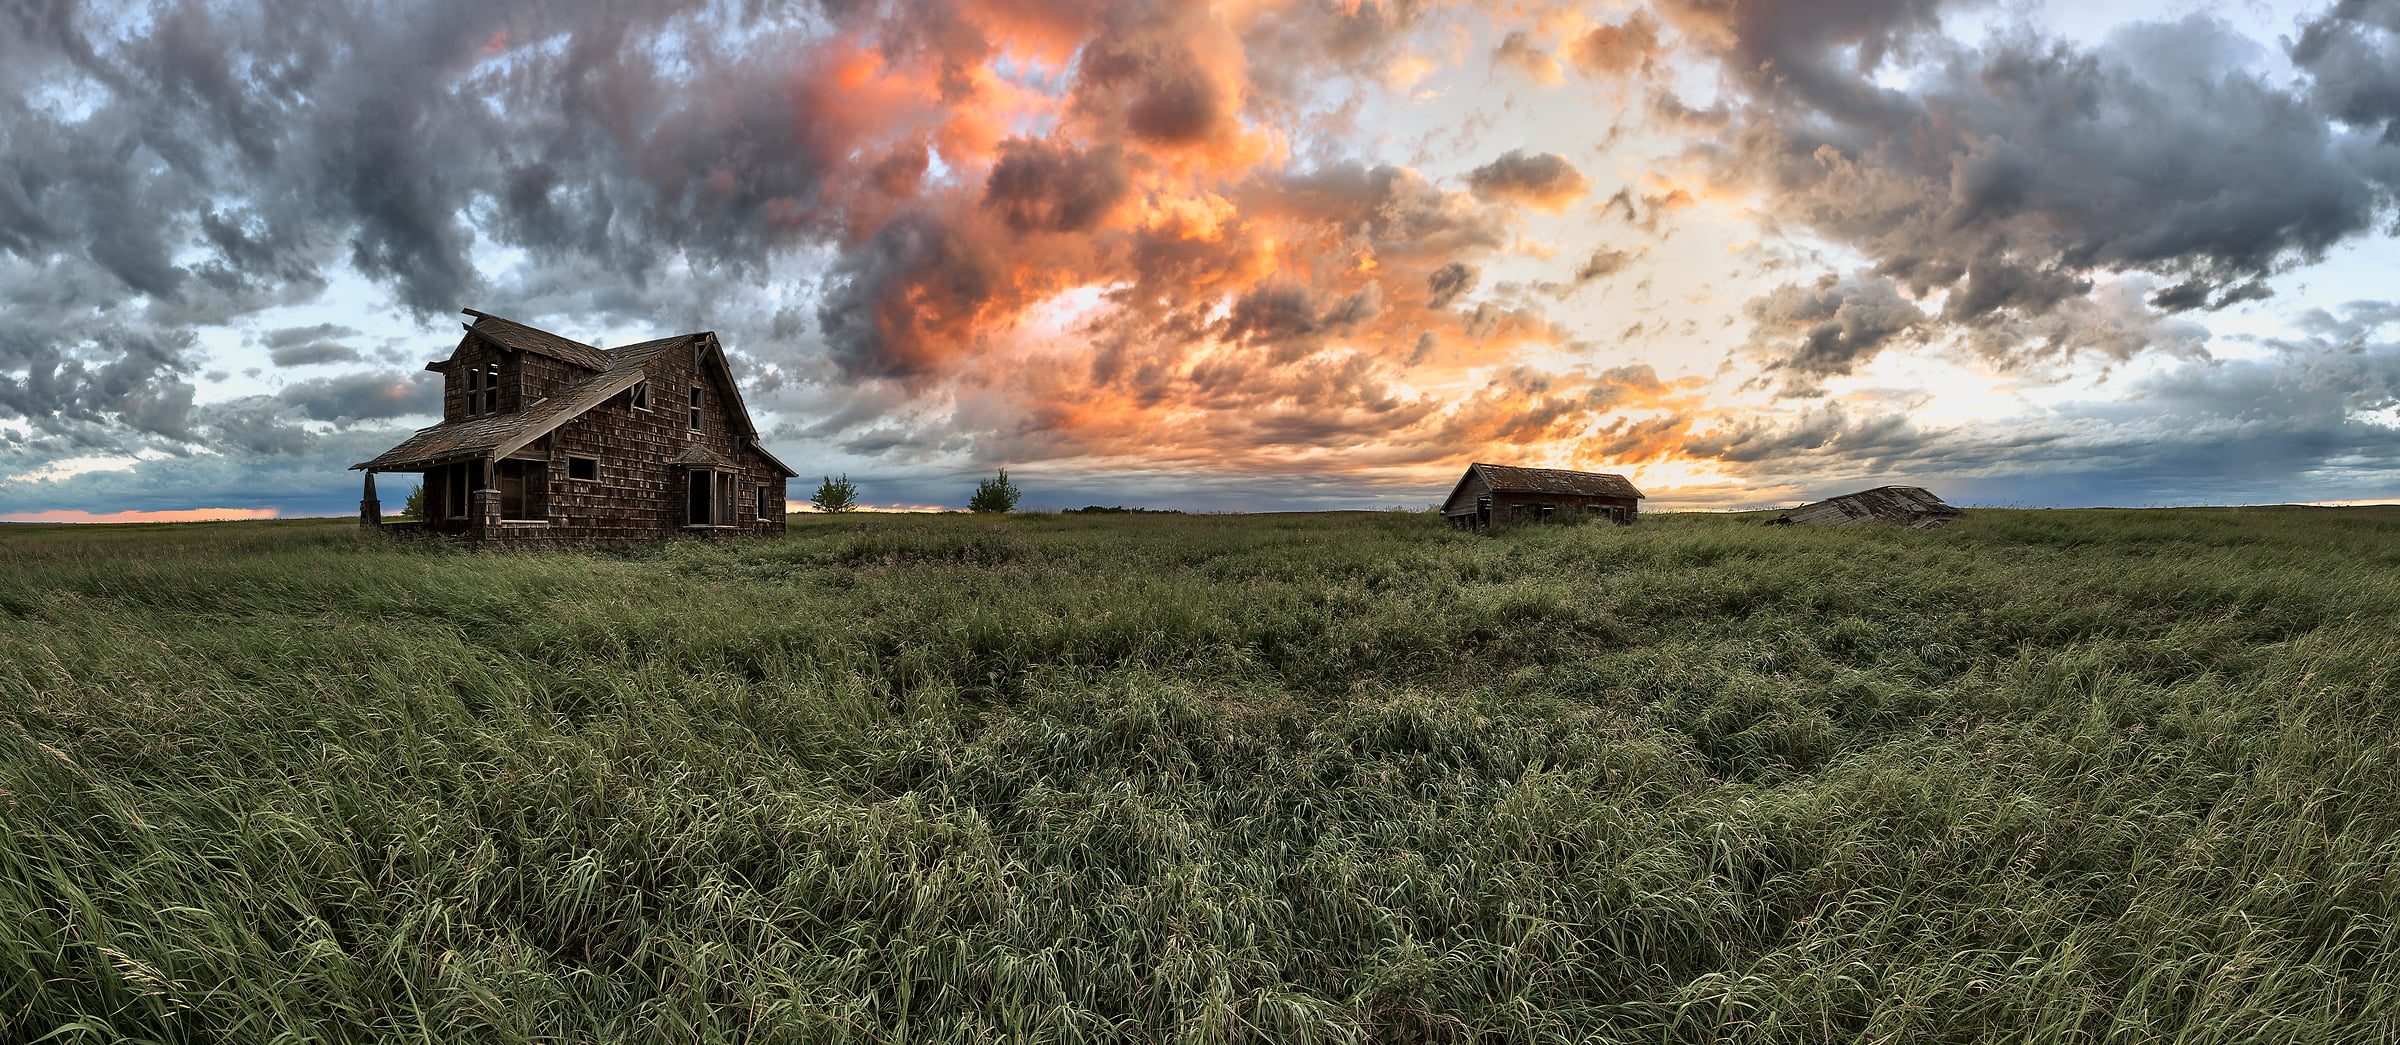 74 megapixels! A very high resolution, large-format VAST photo of farmland, grasslands, the prairie, and an old abandoned house; fine art landscape photo created at sunrise by Scott Dimond on the Great Plains in Alberta, Canada